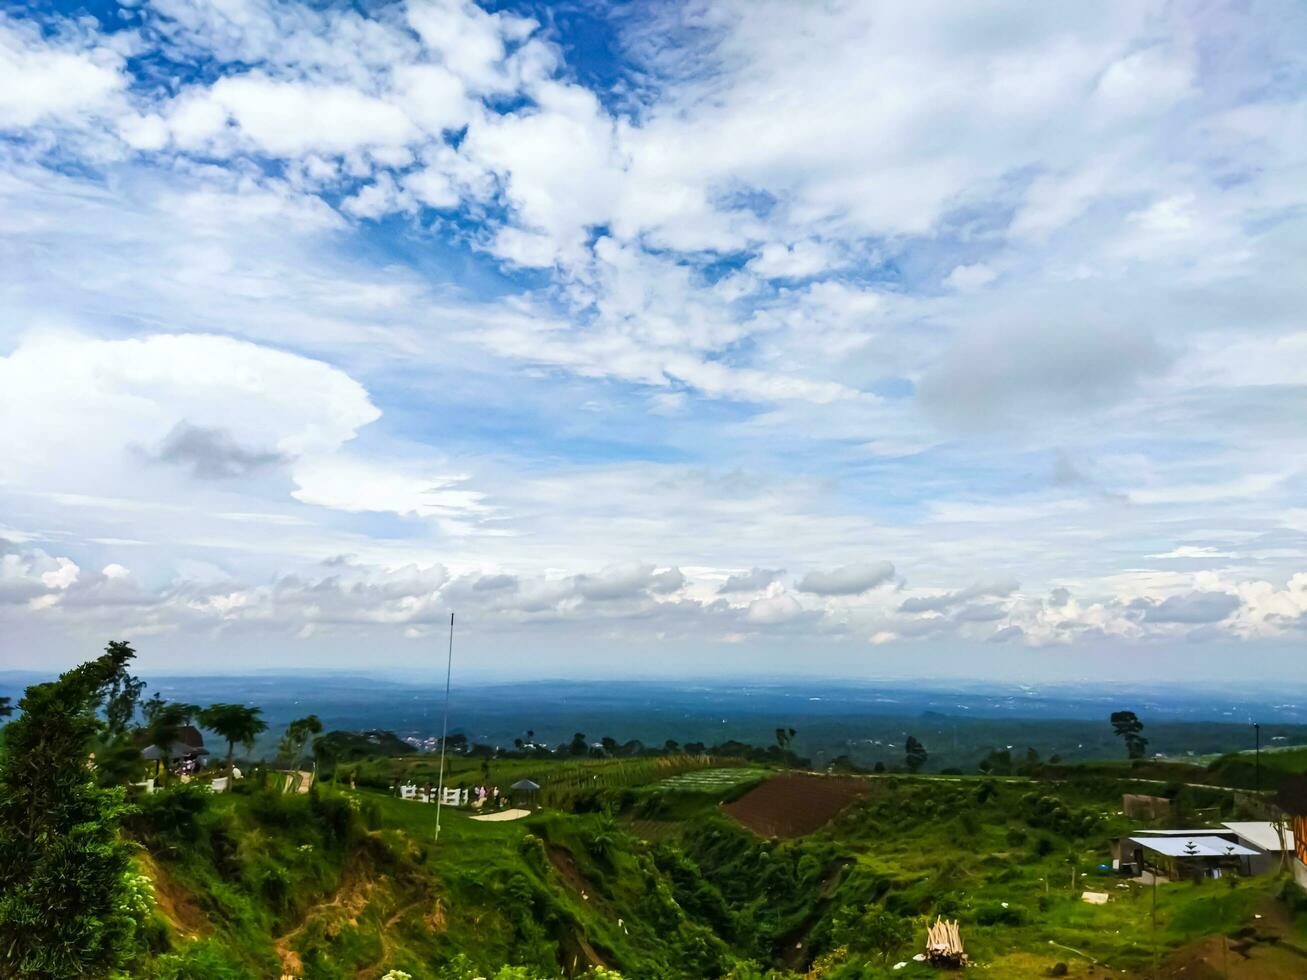 Scenery from the observation deck of Cepogo,Boyolali, Central Java, summer, nature of Indonesia photo